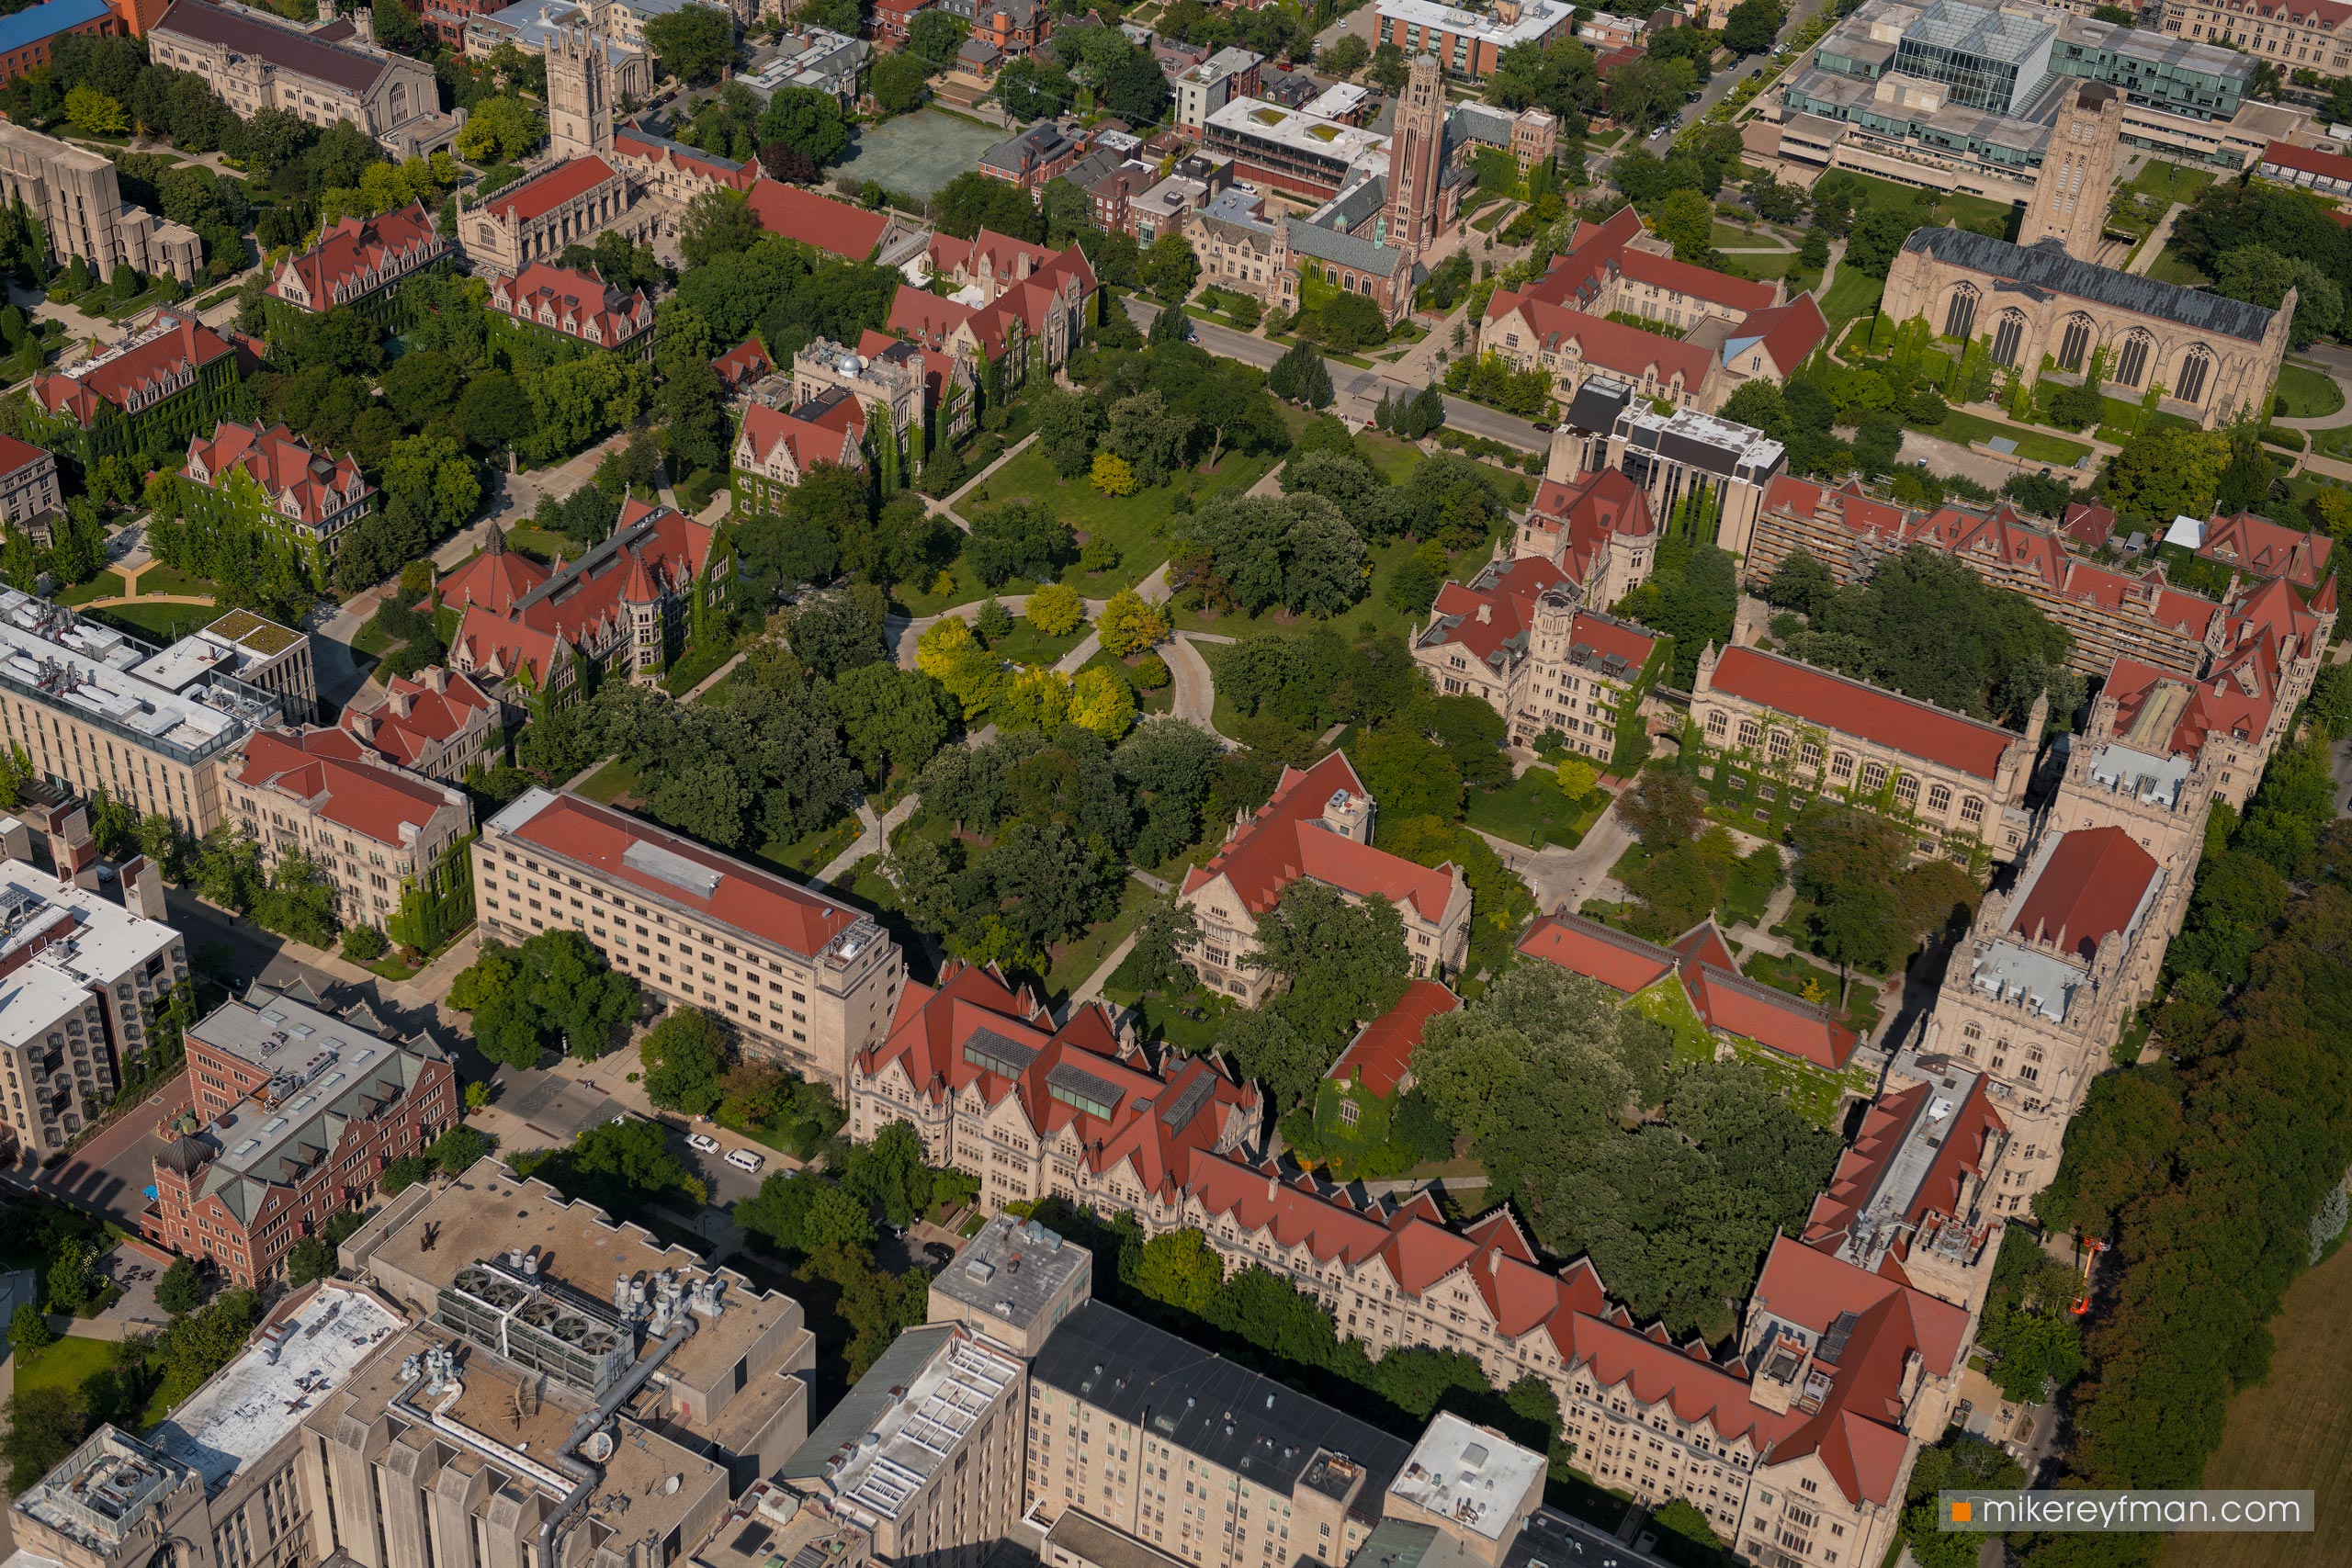 Aerial view of the University of Chicago campus, Illinois, USA 036-CH-2_50F1868 - Ever-beating architectural heart of America. The birthplace of the most iconic buildings in the country. - Mike Reyfman Photography